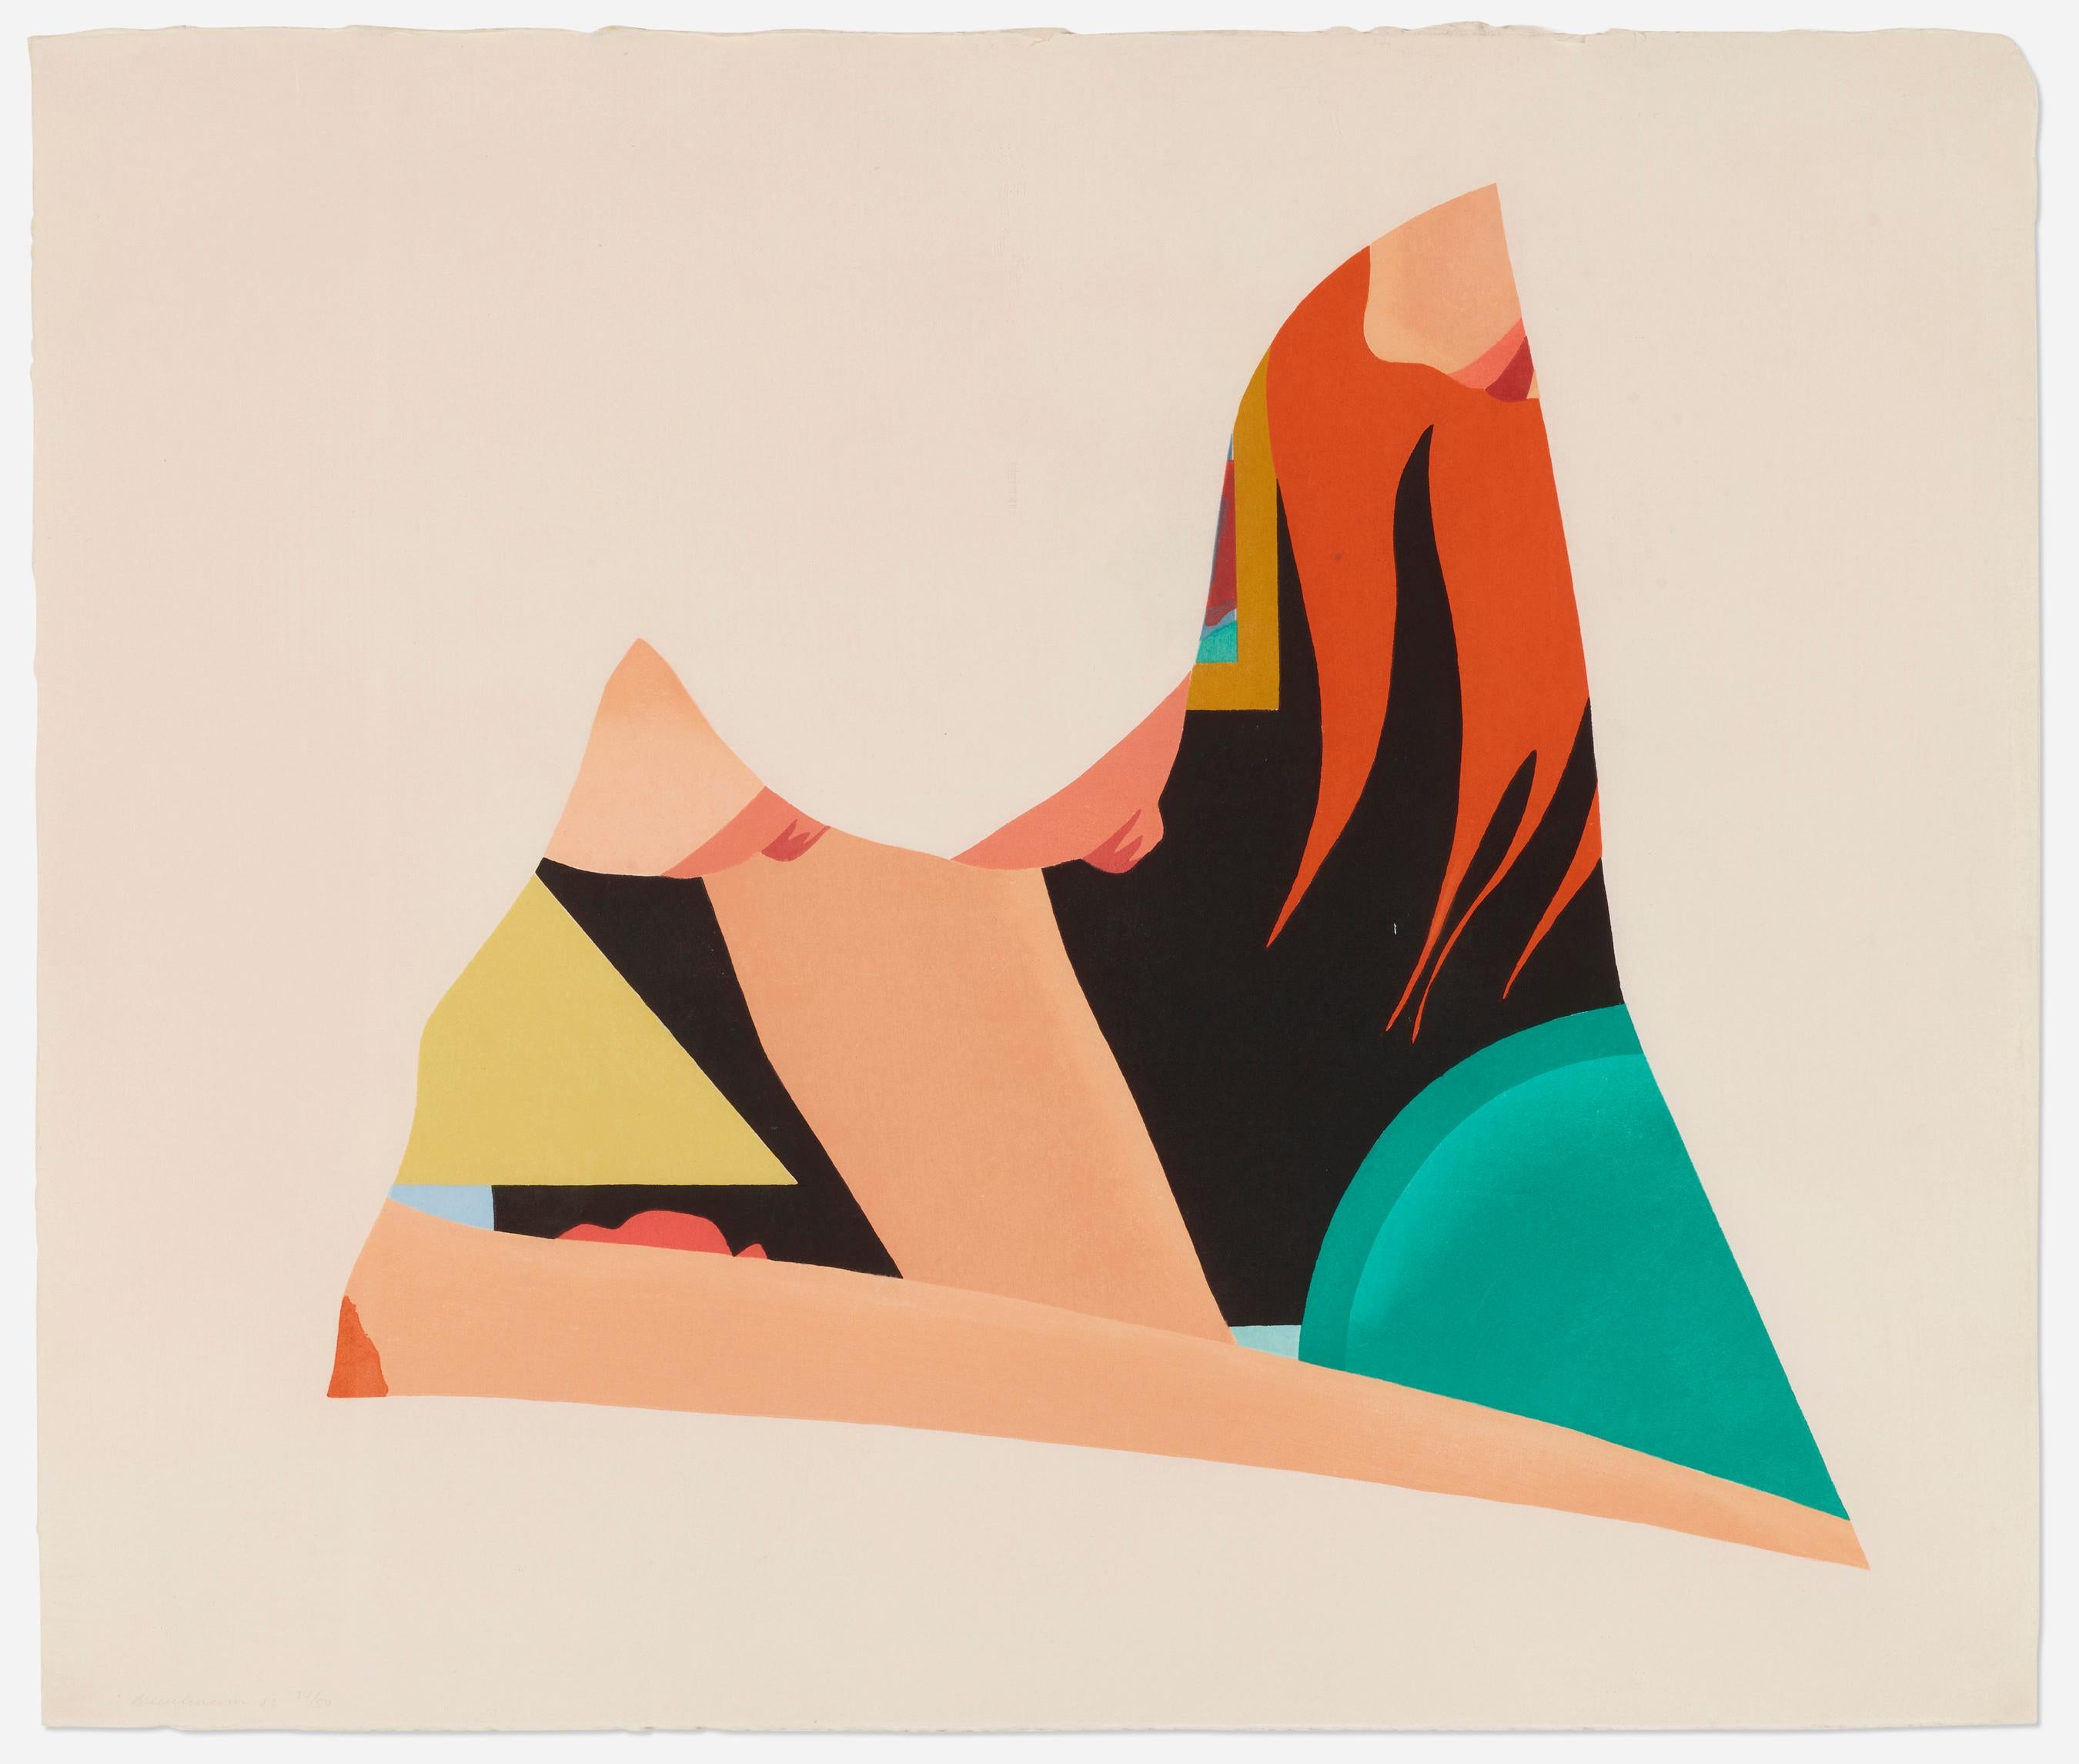 Tom Wesselmann- Bedroom Dropout, 1983
Woodcut on Kizuki Hanga wove paper
Signed, dated and numbered to lower edge ‘Wesselmann '83 34/50’
This work is number 34 from the edition of 50 
Printed by Michael Berden
Published by Multiples Inc., New